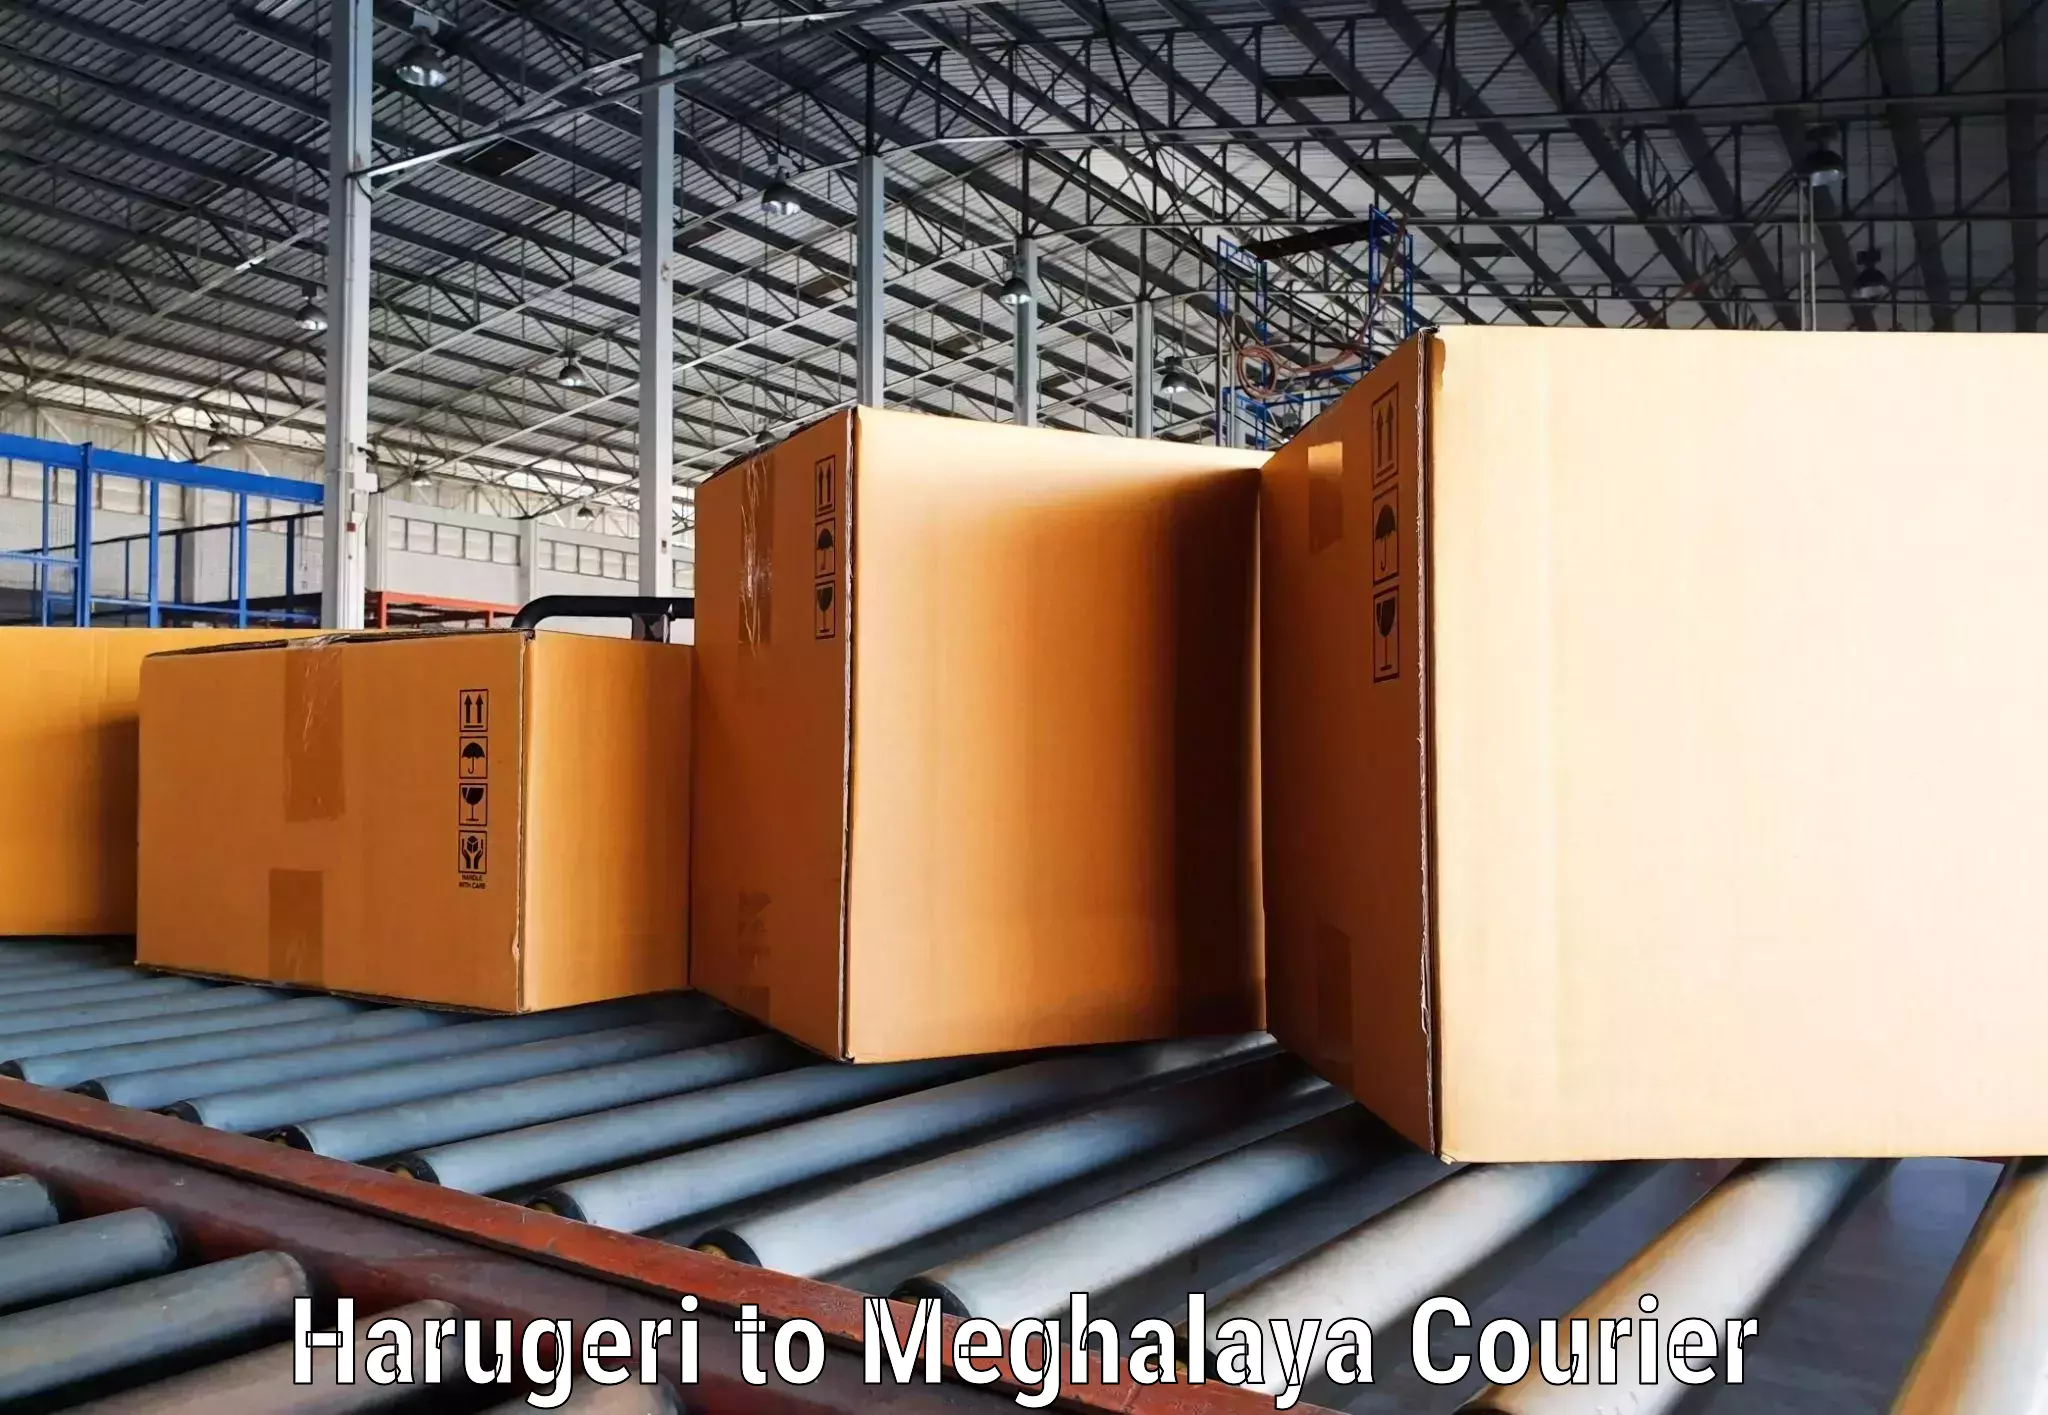 Flexible delivery schedules Harugeri to Meghalaya